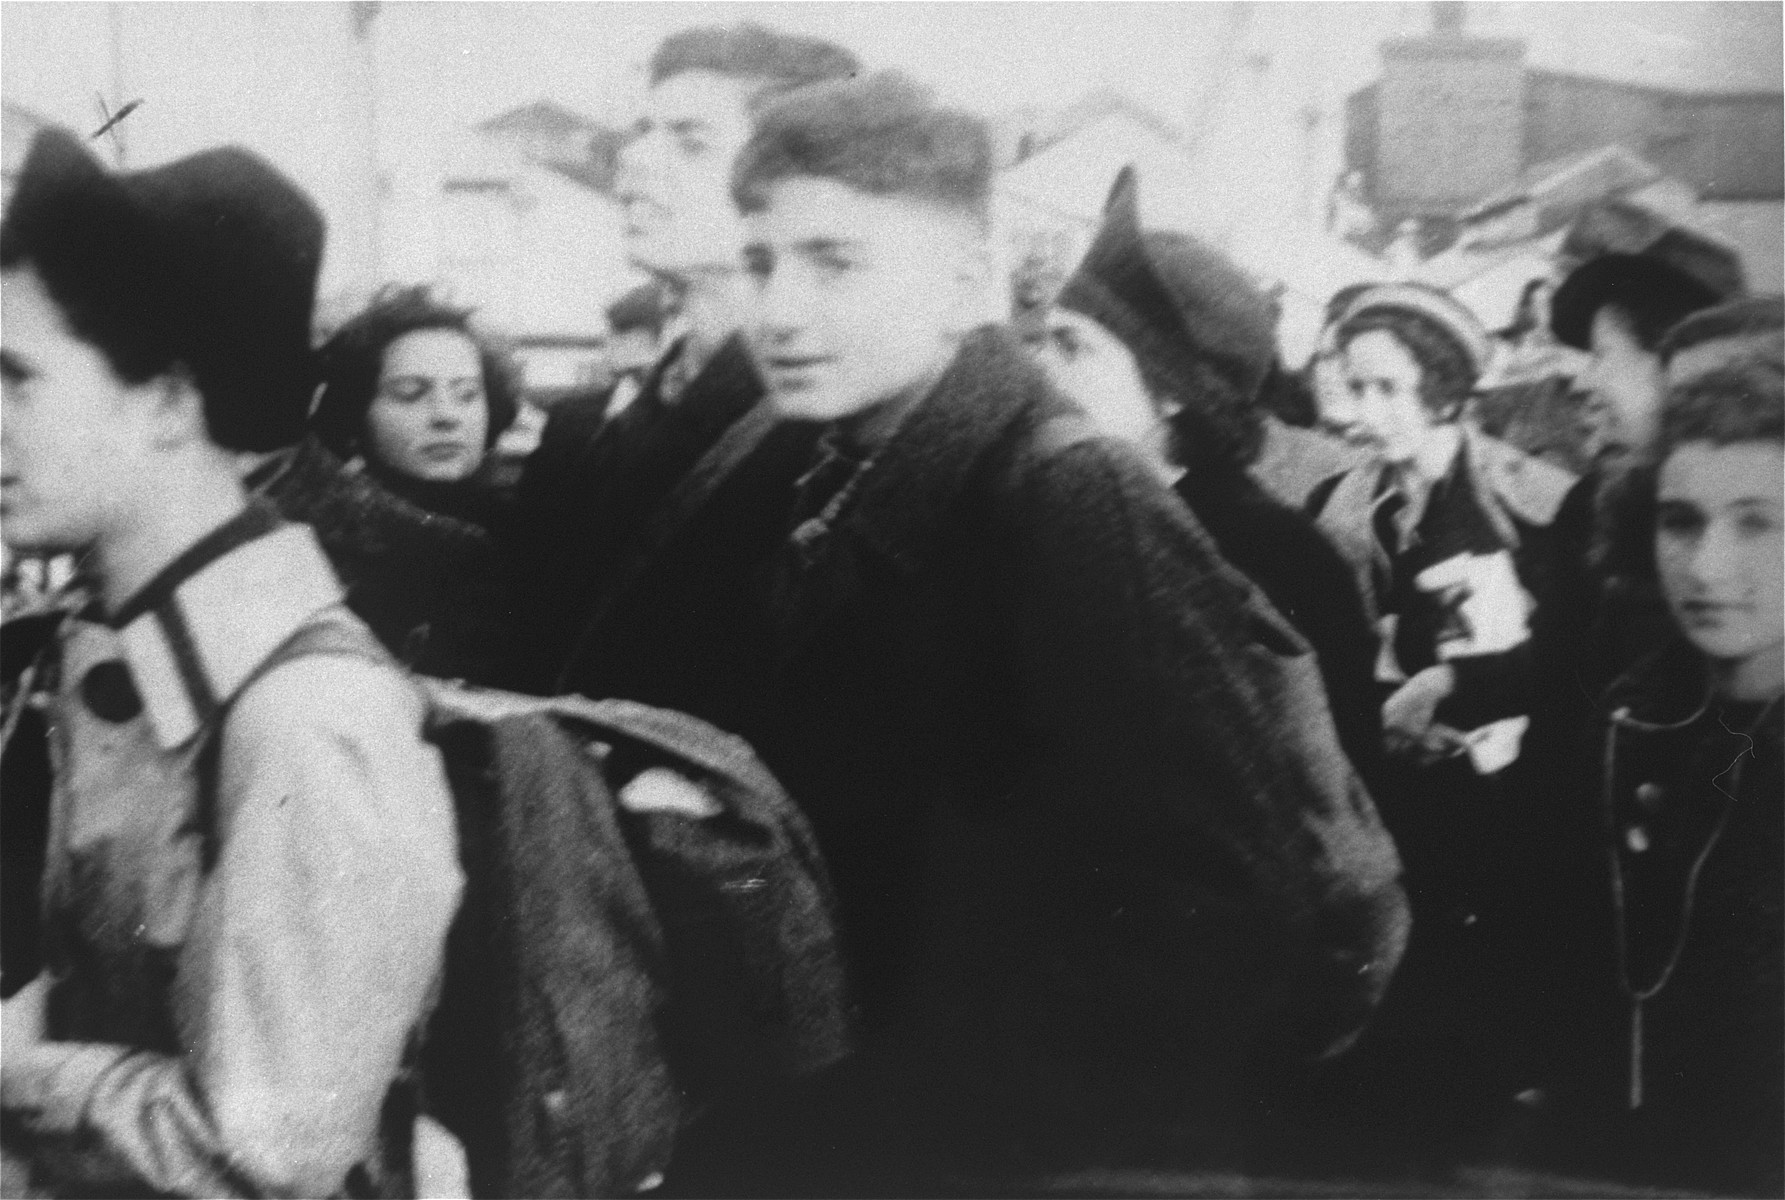 Members of the first Kindertransport arrive in Harwich, England.  

Among those pictured is the donor, Frances Rose, at the far left and Ersnt (later Ernest) Winter (center).